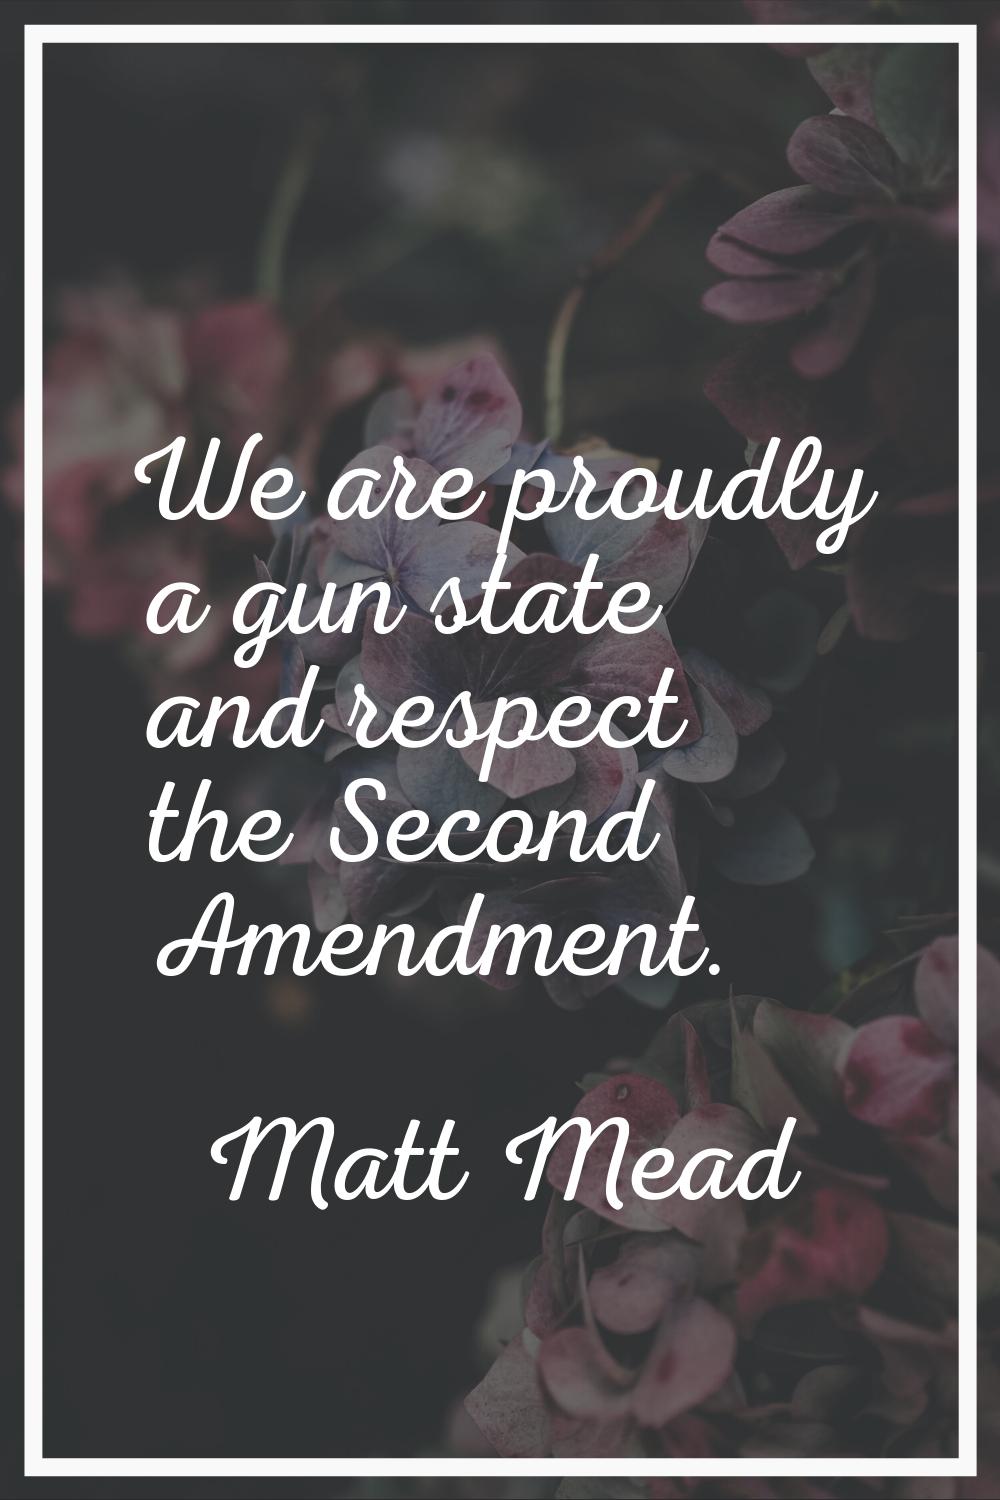 We are proudly a gun state and respect the Second Amendment.